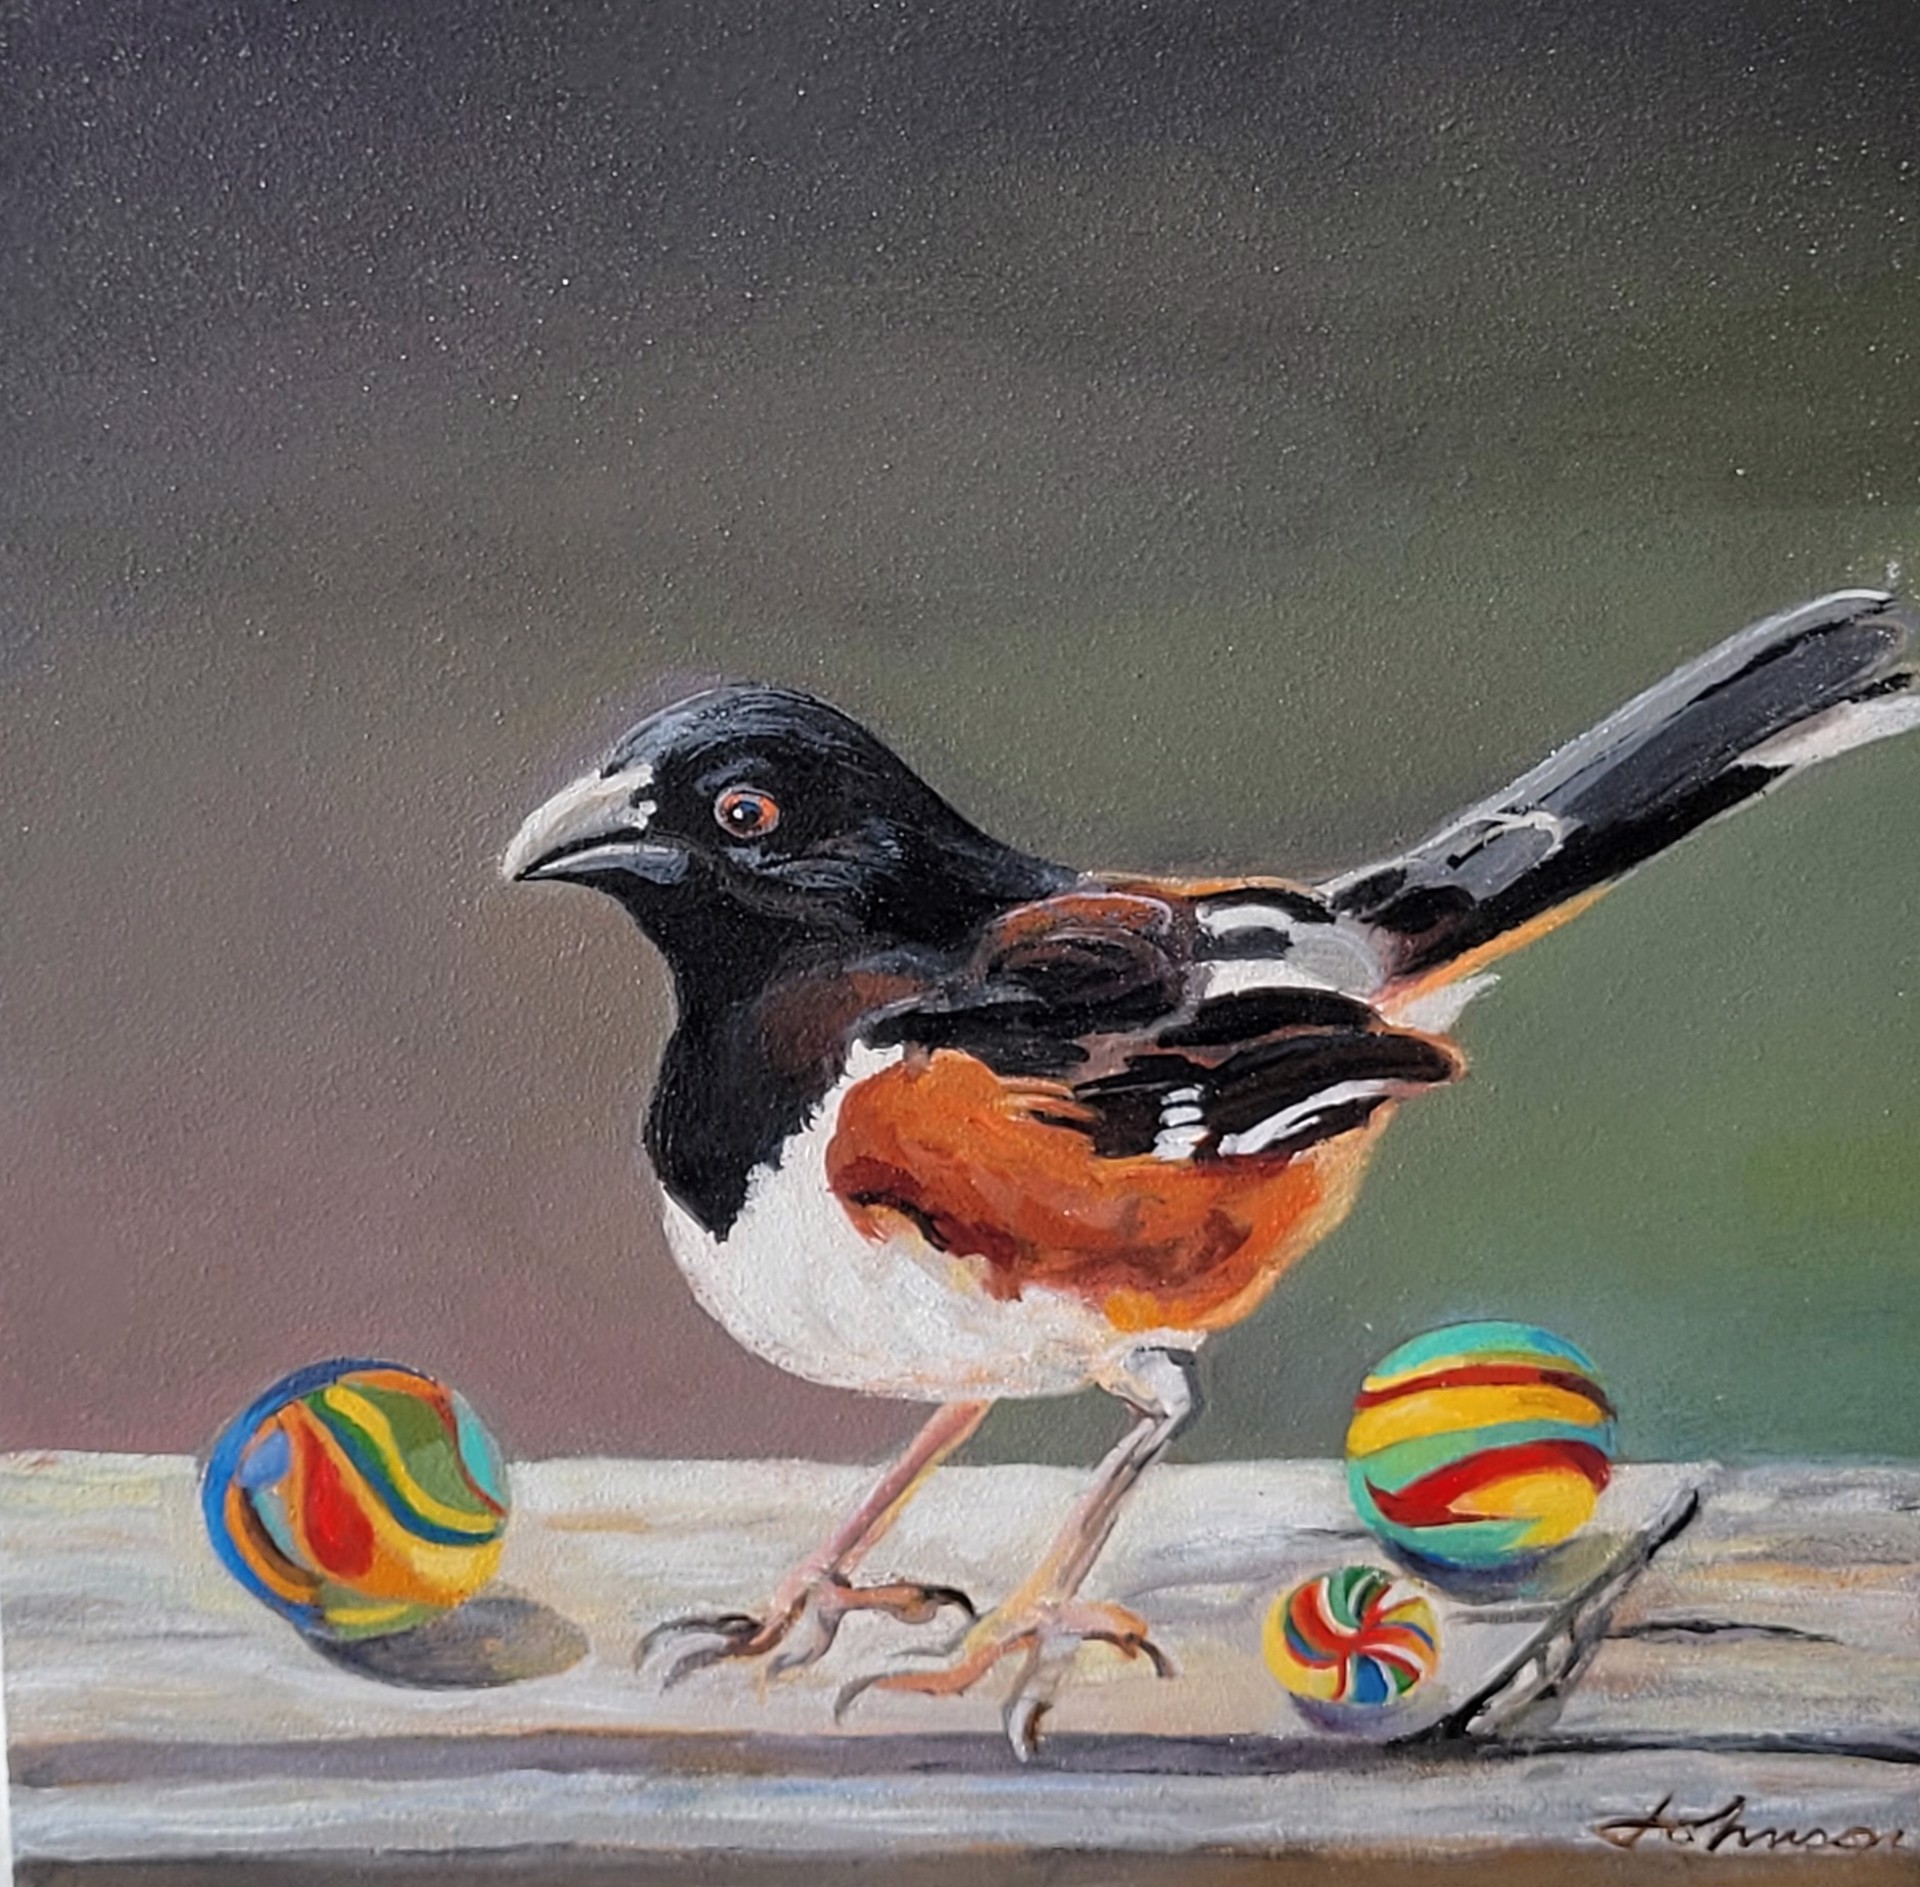 Towhee with Marbles (Red, Black, and White bird) by Nancy Johnson